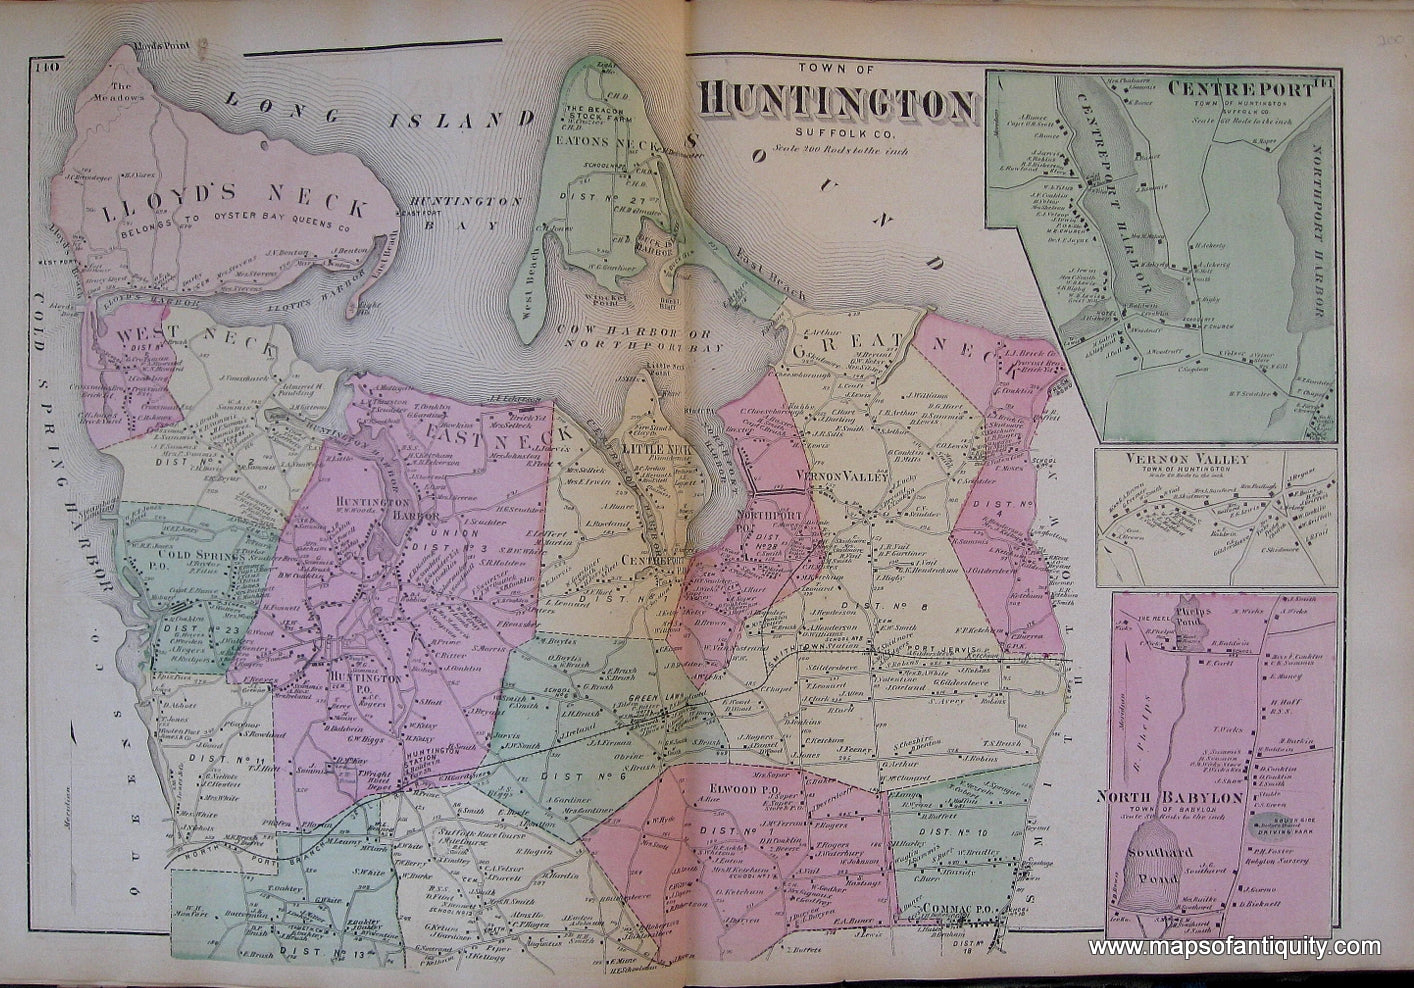 Antique-Hand-Colored-Map-Town-of-Huntington-Centreport-Vernon-Valley-North-Babylon-verso-Cold-Spring-Huntington-Harbor-Northport-Deer-Park-and-Amityville-(NY)-******-United-States-Northeast-1873-Beers-Maps-Of-Antiquity